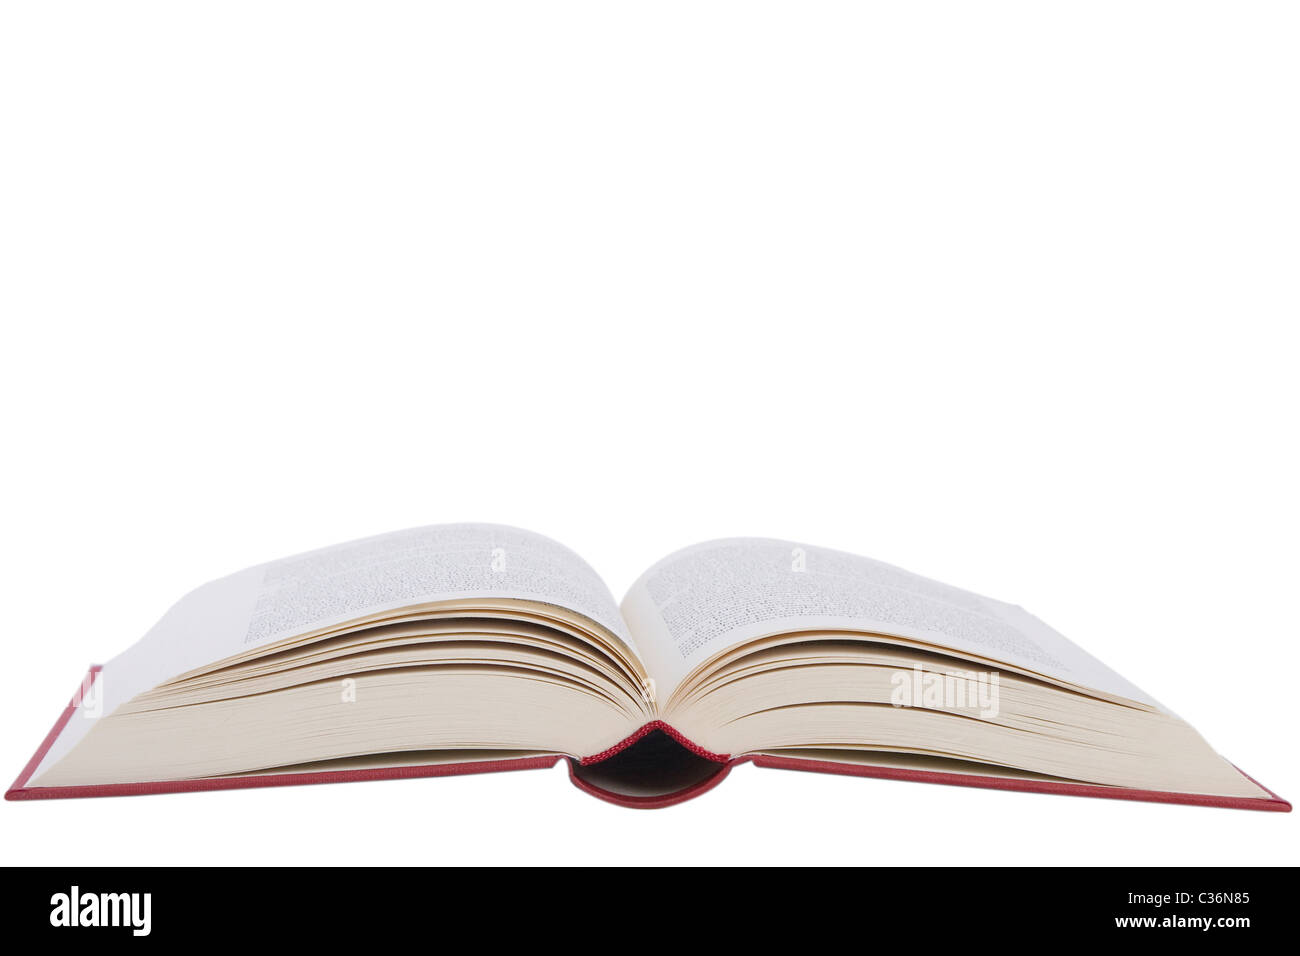 front view of open book on white background Stock Photo